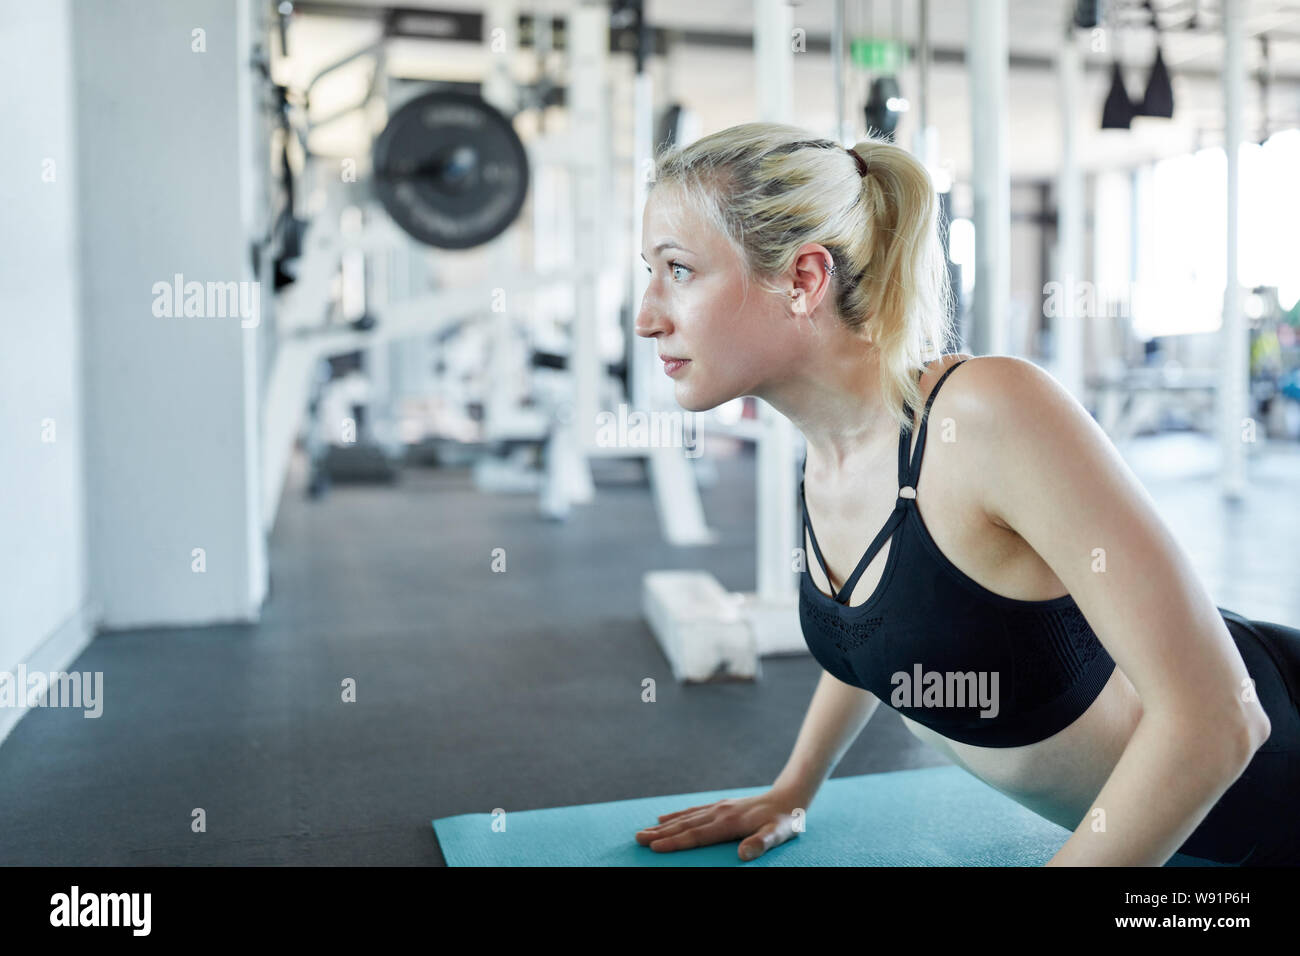 Young woman is doing a Pilates or yoga exercise on the mat in the gym class Stock Photo